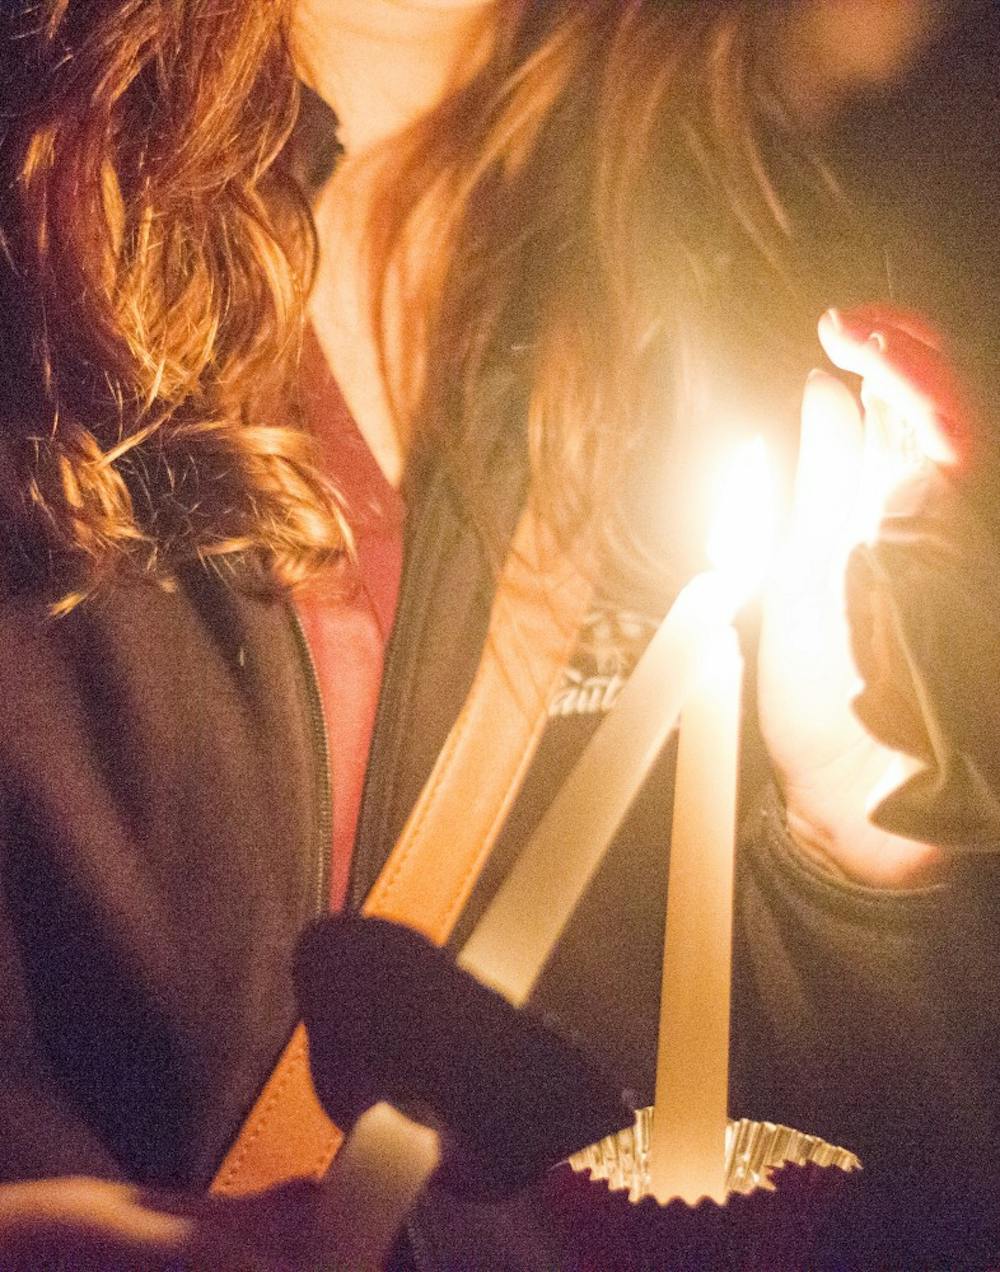 Students light candles at Take Back the Night on Oct. 14 at the Quad. Take Back the Night is a march to spread domestic violence. DN PHOTO ALAINA JAYE HALSEY